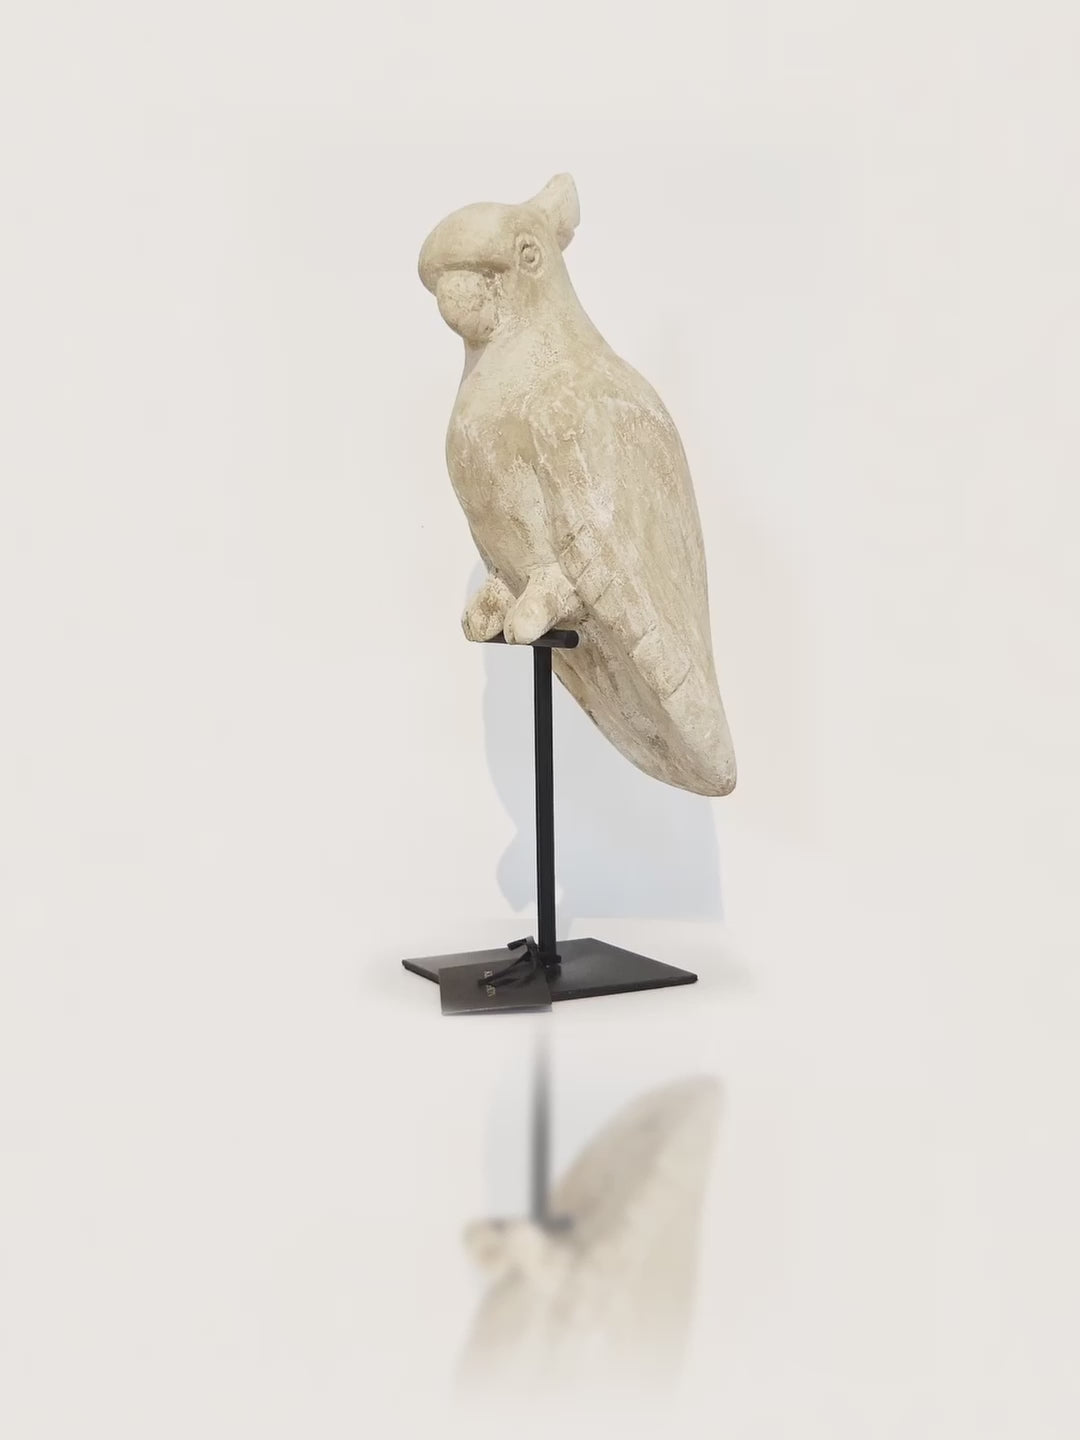 Crested cockatoo statue from Timor - Asian Art from Kirschon